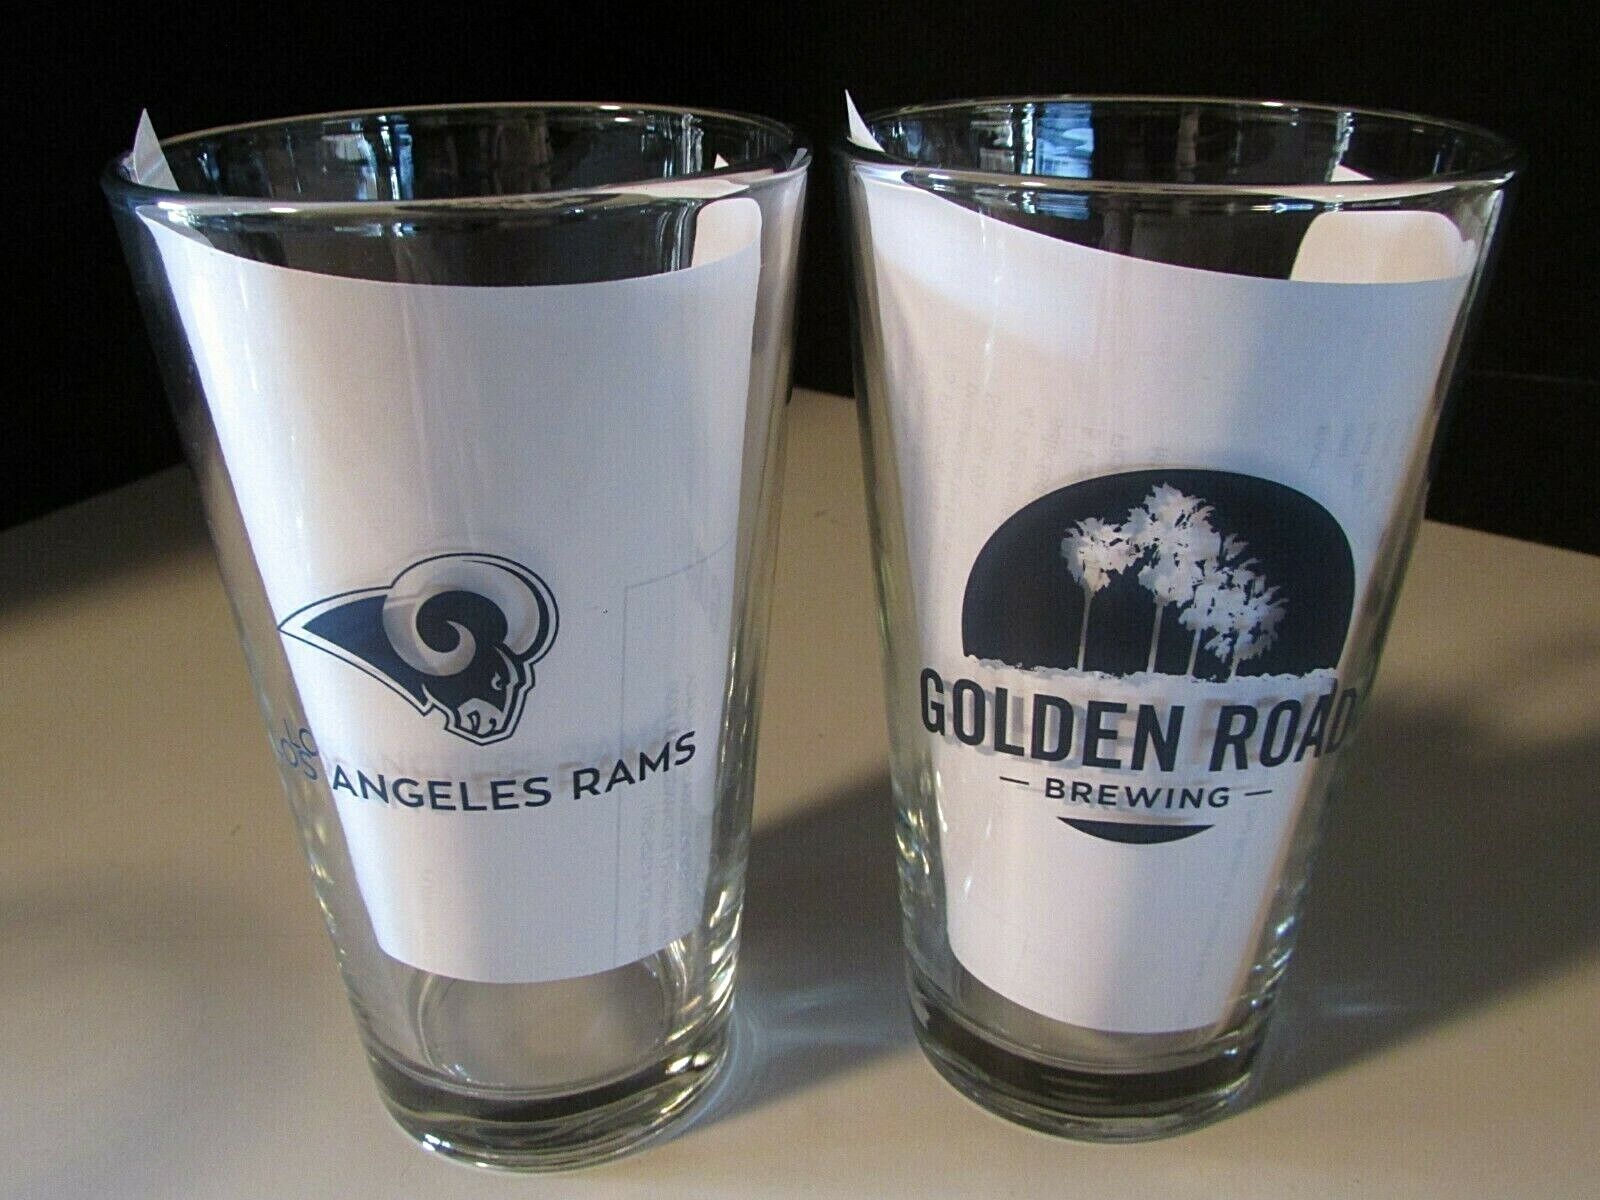 (4) NEW Golden road Brewery Los Angeles Rams NFL Beer Pint Glass Man Cave Bar  Без бренда